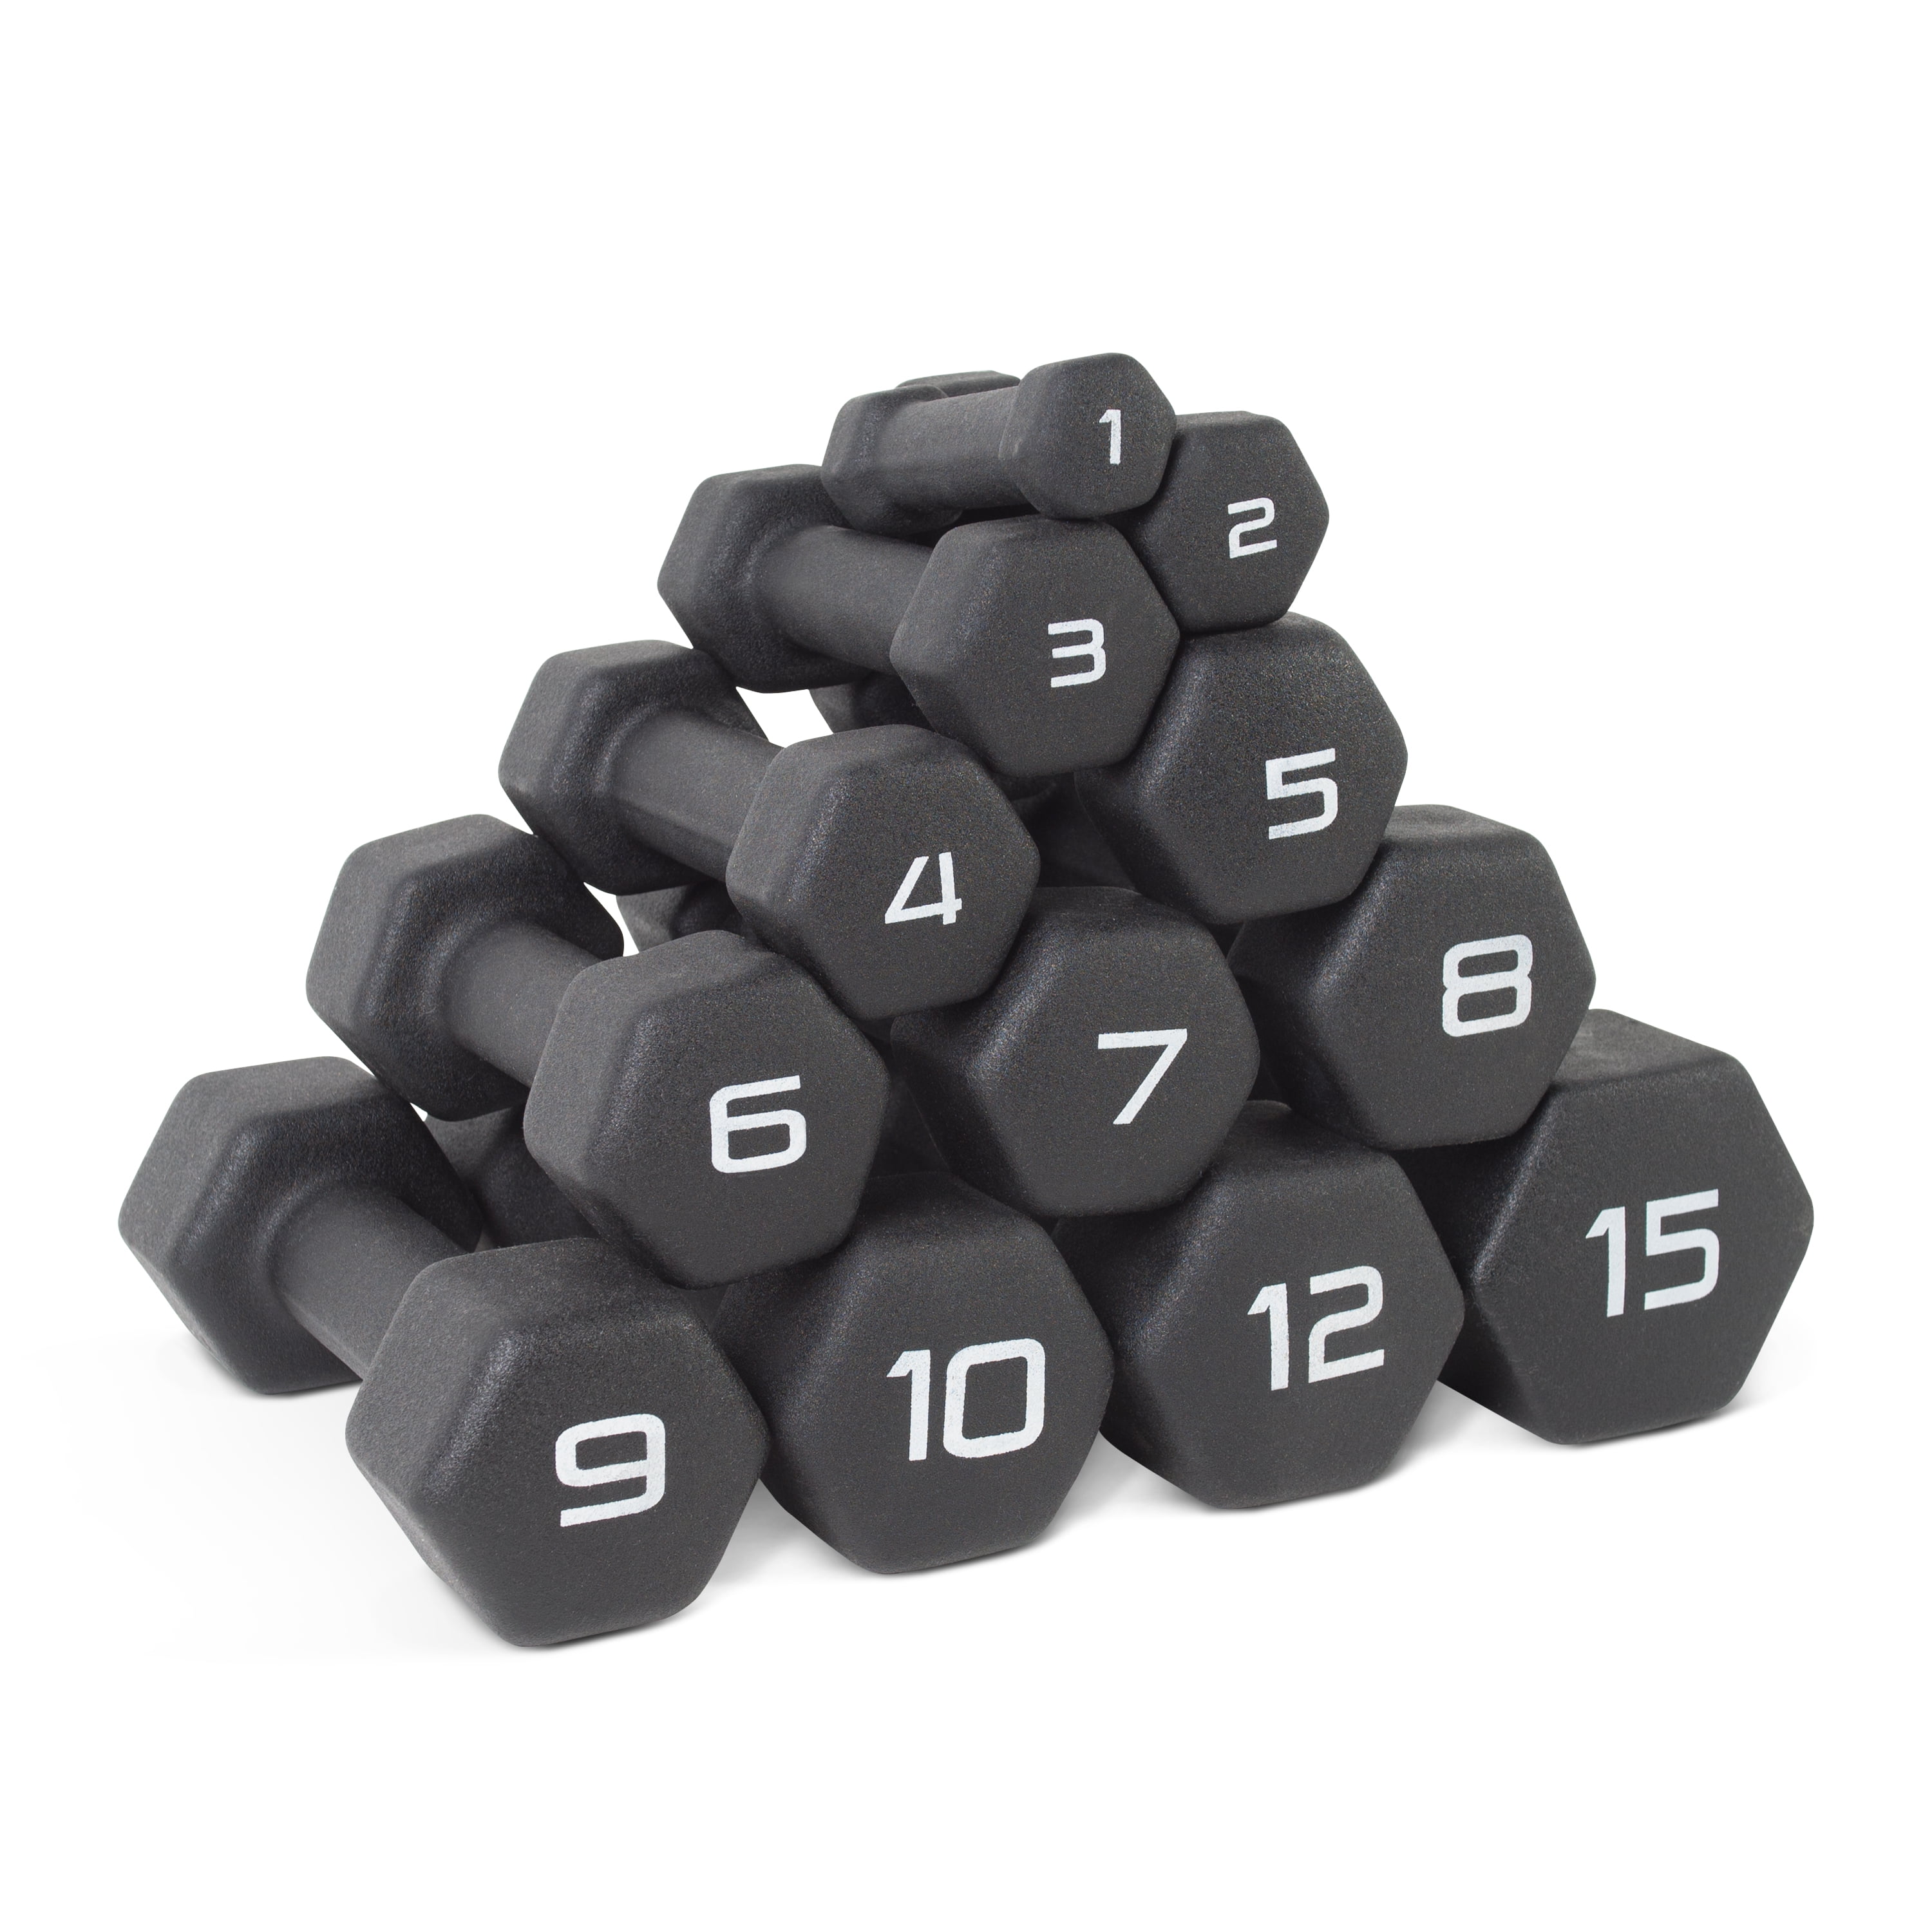 10 &12 lbs 9 3 8 4 6 7 5 CAP Neoprene Dipped Dumbbell Weights Sizes 1 2 